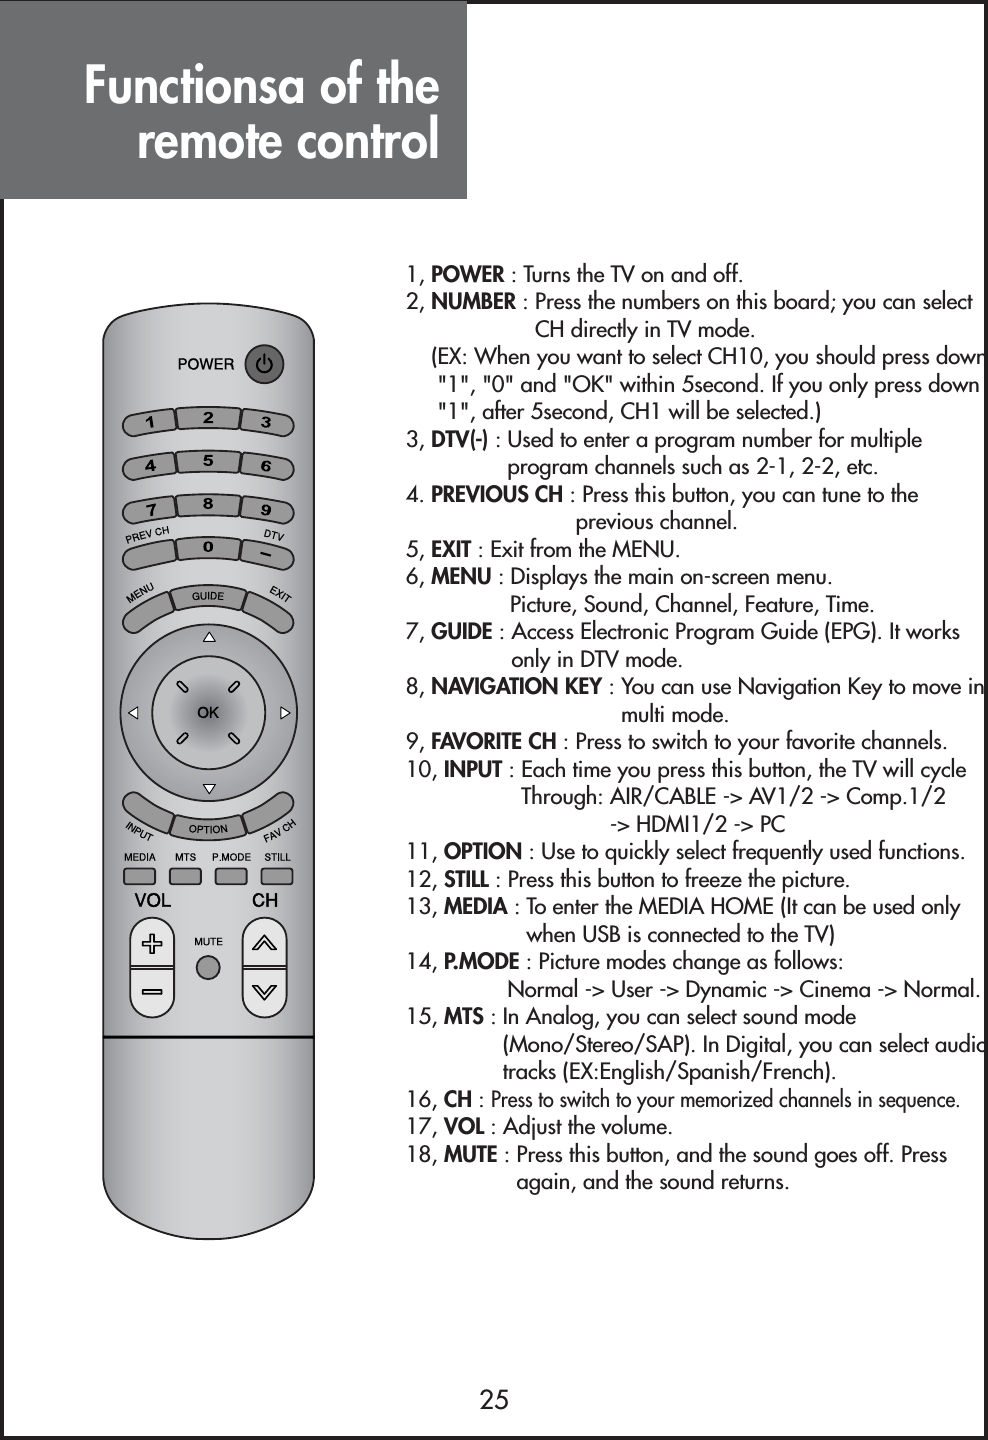 Functionsa of theremote control251, POWER : Turns the TV on and off.2, NUMBER : Press the numbers on this board; you can selectCH directly in TV mode.(EX: When you want to select CH10, you should press down&quot;1&quot;, &quot;0&quot; and &quot;OK&quot; within 5second. If you only press down&quot;1&quot;, after 5second, CH1 will be selected.)3, DTV(-) : Used to enter a program number for multipleprogram channels such as 2-1, 2-2, etc.4. PREVIOUS CH : Press this button, you can tune to theprevious channel.5, EXIT : Exit from the MENU.6, MENU : Displays the main on-screen menu. Picture, Sound, Channel, Feature, Time.7, GUIDE : Access Electronic Program Guide (EPG). It worksonly in DTV mode.8, NAVIGATION KEY : You can use Navigation Key to move inmulti mode. 9, FAVORITE CH : Press to switch to your favorite channels.10, INPUT : Each time you press this button, the TV will cycleThrough: AIR/CABLE -&gt; AV1/2 -&gt; Comp.1/2-&gt; HDMI1/2 -&gt; PC11, OPTION : Use to quickly select frequently used functions.12, STILL : Press this button to freeze the picture.13, MEDIA : To enter the MEDIA HOME (It can be used onlywhen USB is connected to the TV)14, P.MODE : Picture modes change as follows:Normal -&gt; User -&gt; Dynamic -&gt; Cinema -&gt; Normal.15, MTS : In Analog, you can select sound mode(Mono/Stereo/SAP). In Digital, you can select audiotracks (EX:English/Spanish/French).16, CH : Press to switch to your memorized channels in sequence.17, VOL : Adjust the volume.18, MUTE : Press this button, and the sound goes off. Pressagain, and the sound returns.-